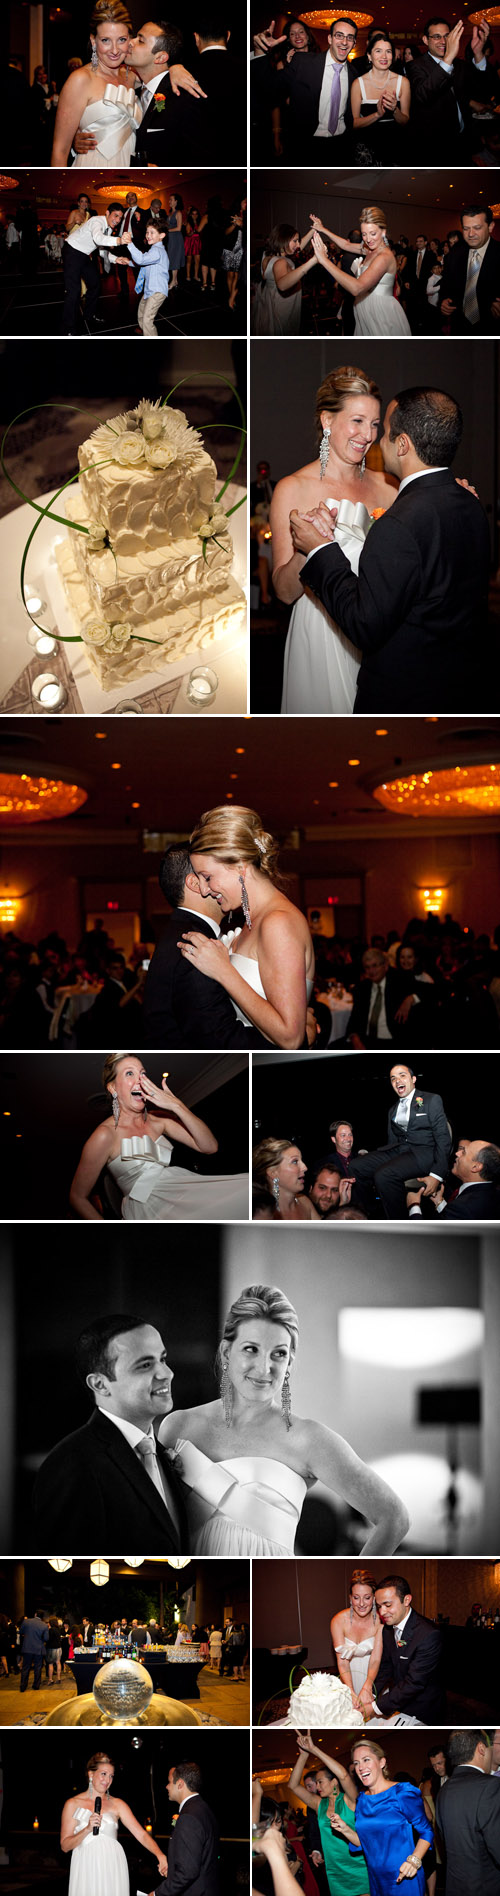 Palm Springs real wedding at Hotel Riviera, photos by Mary McHenry Photography